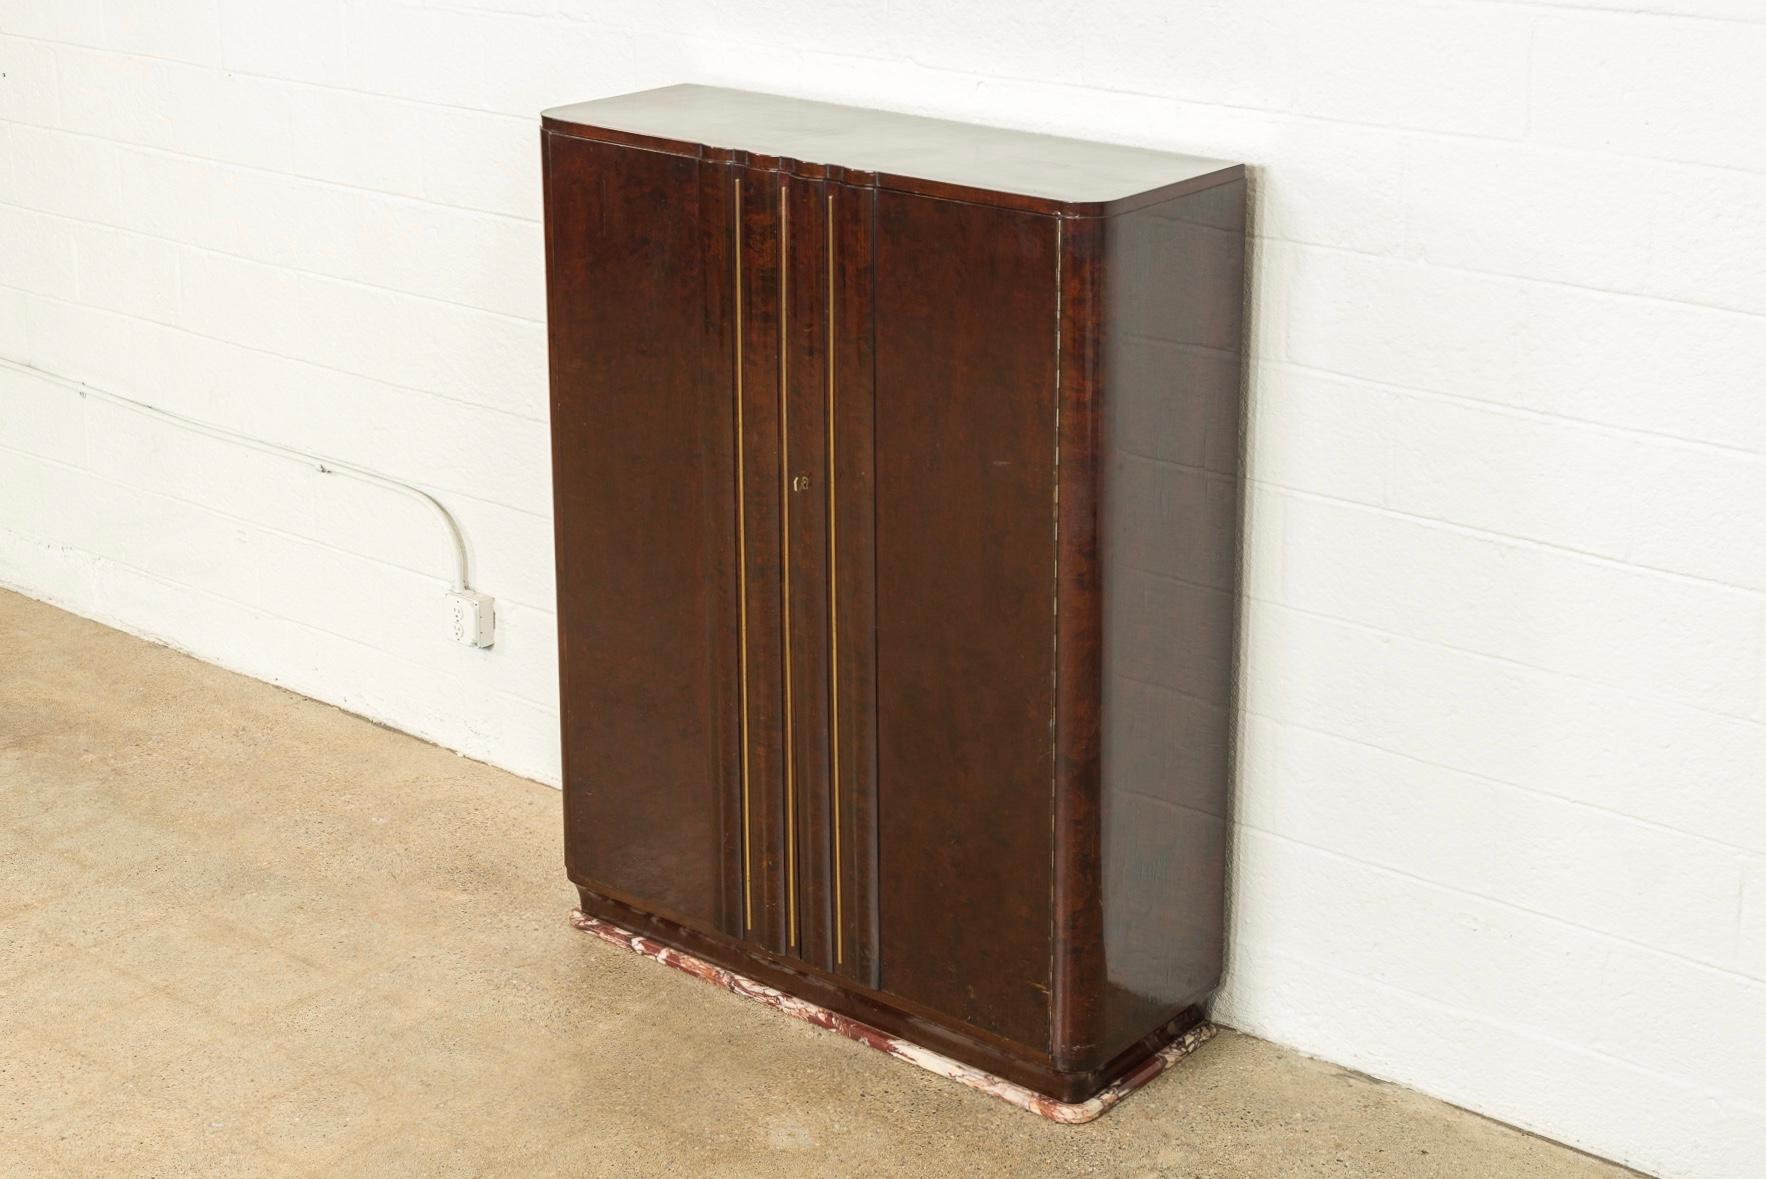 This exceptional Art Deco burl wood bronze decorated two door bar cabinet is circa 1920. Exquisitely crafted, the lacquered burlwood cabinet features two fluted front doors with vertical bronze stripe decoration. The cabinet rests on a rouge marble